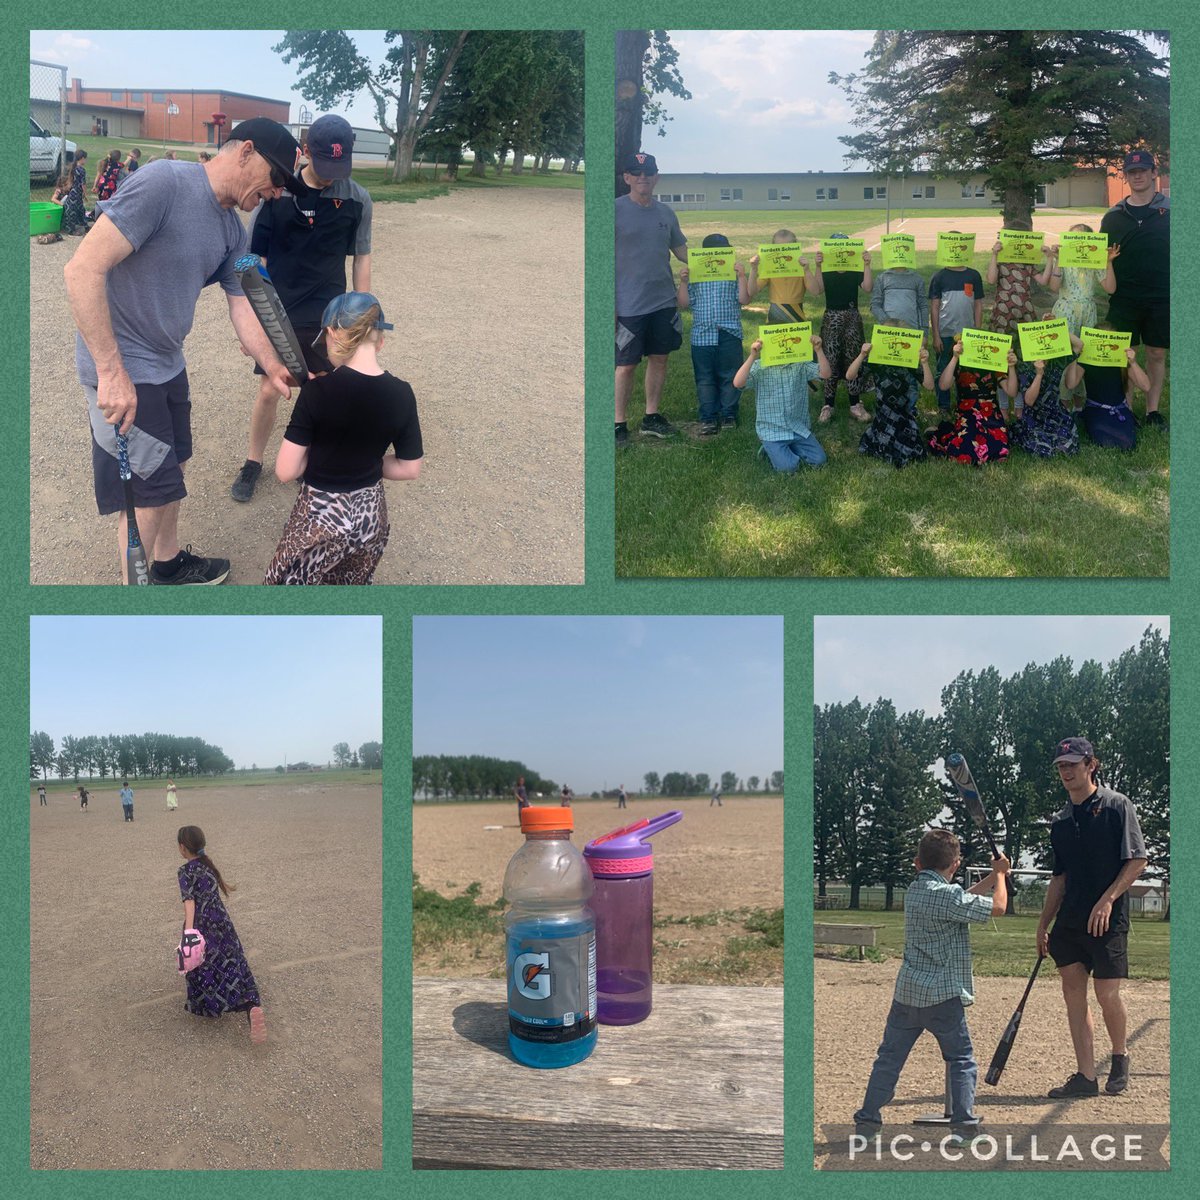 Our 5th annual baseball clinic was held with Gr 2 @SchoolBurdett. Huge thanks to @cam_cleland and @carsoncleo1 (we cheered for him & @nitroshockey) for their time and expertise.#funforall @PrairieRoseSD8 #kindlehearts #igniteminds #community #baseball #coach ⚾️⚾️